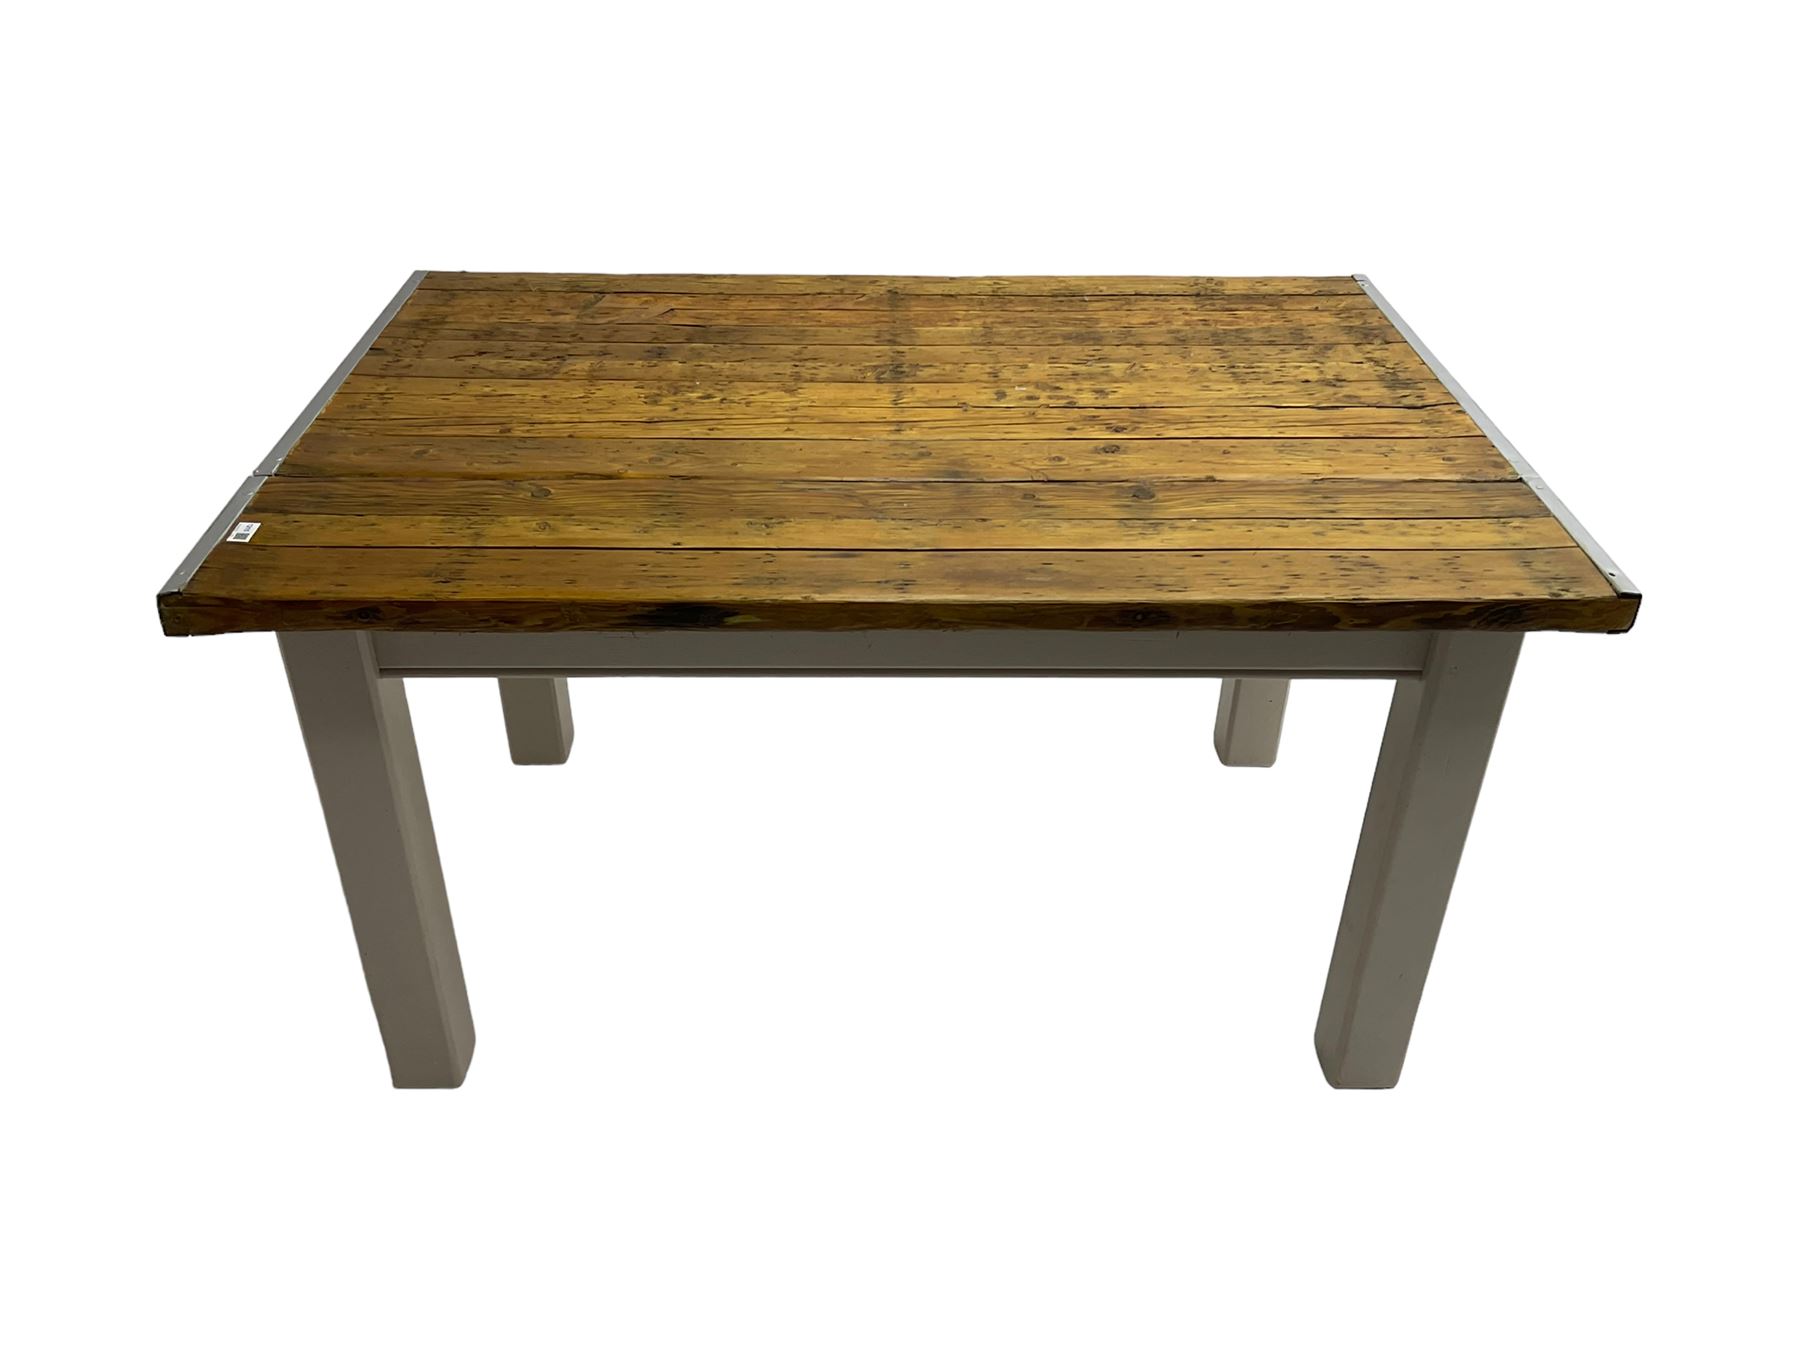 Rustic pine dining table - Image 2 of 6